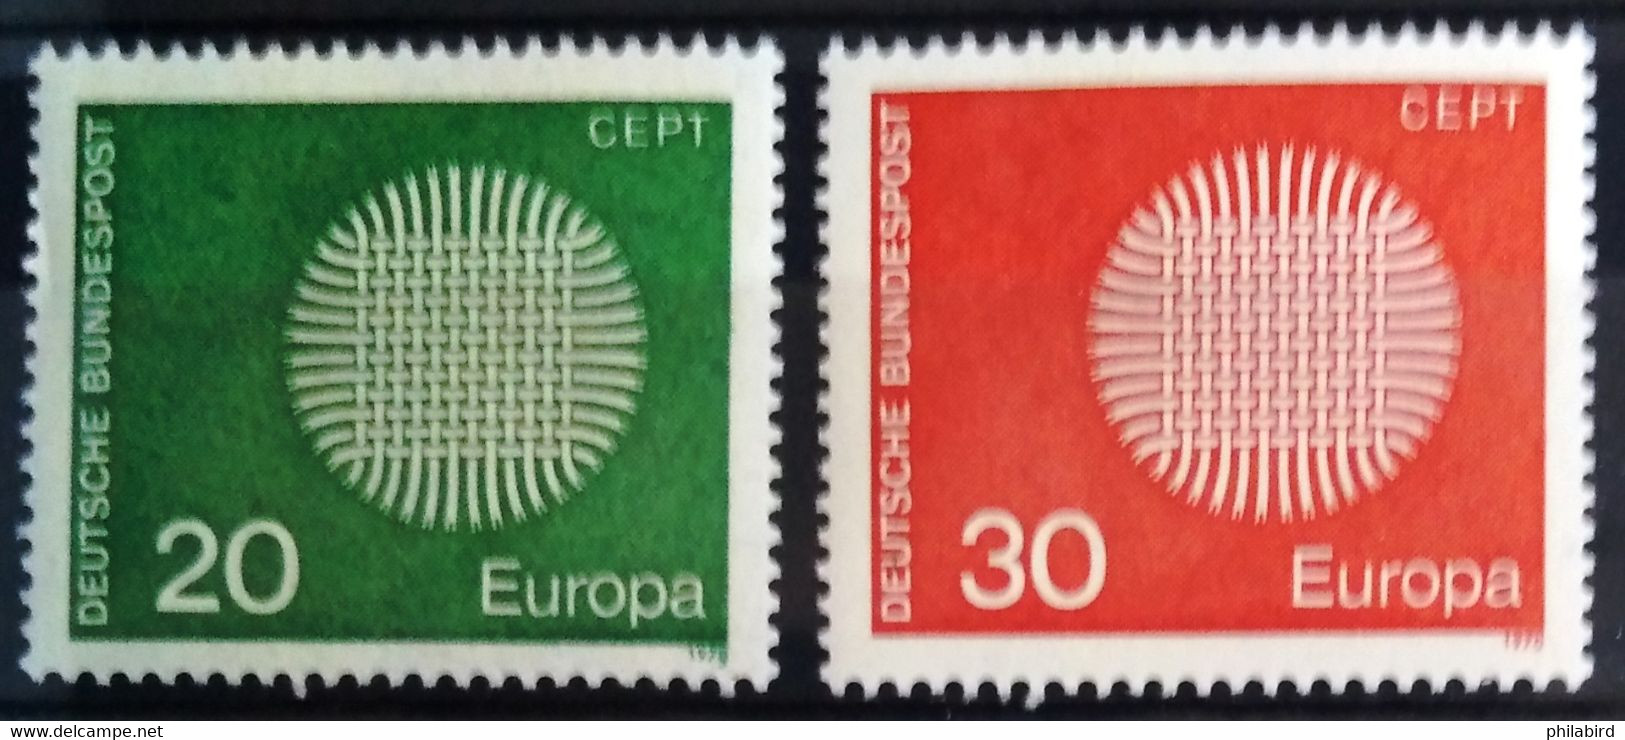 EUROPA 1970 - ALLEMAGNE                    N° 483/484                        NEUF** - 1970